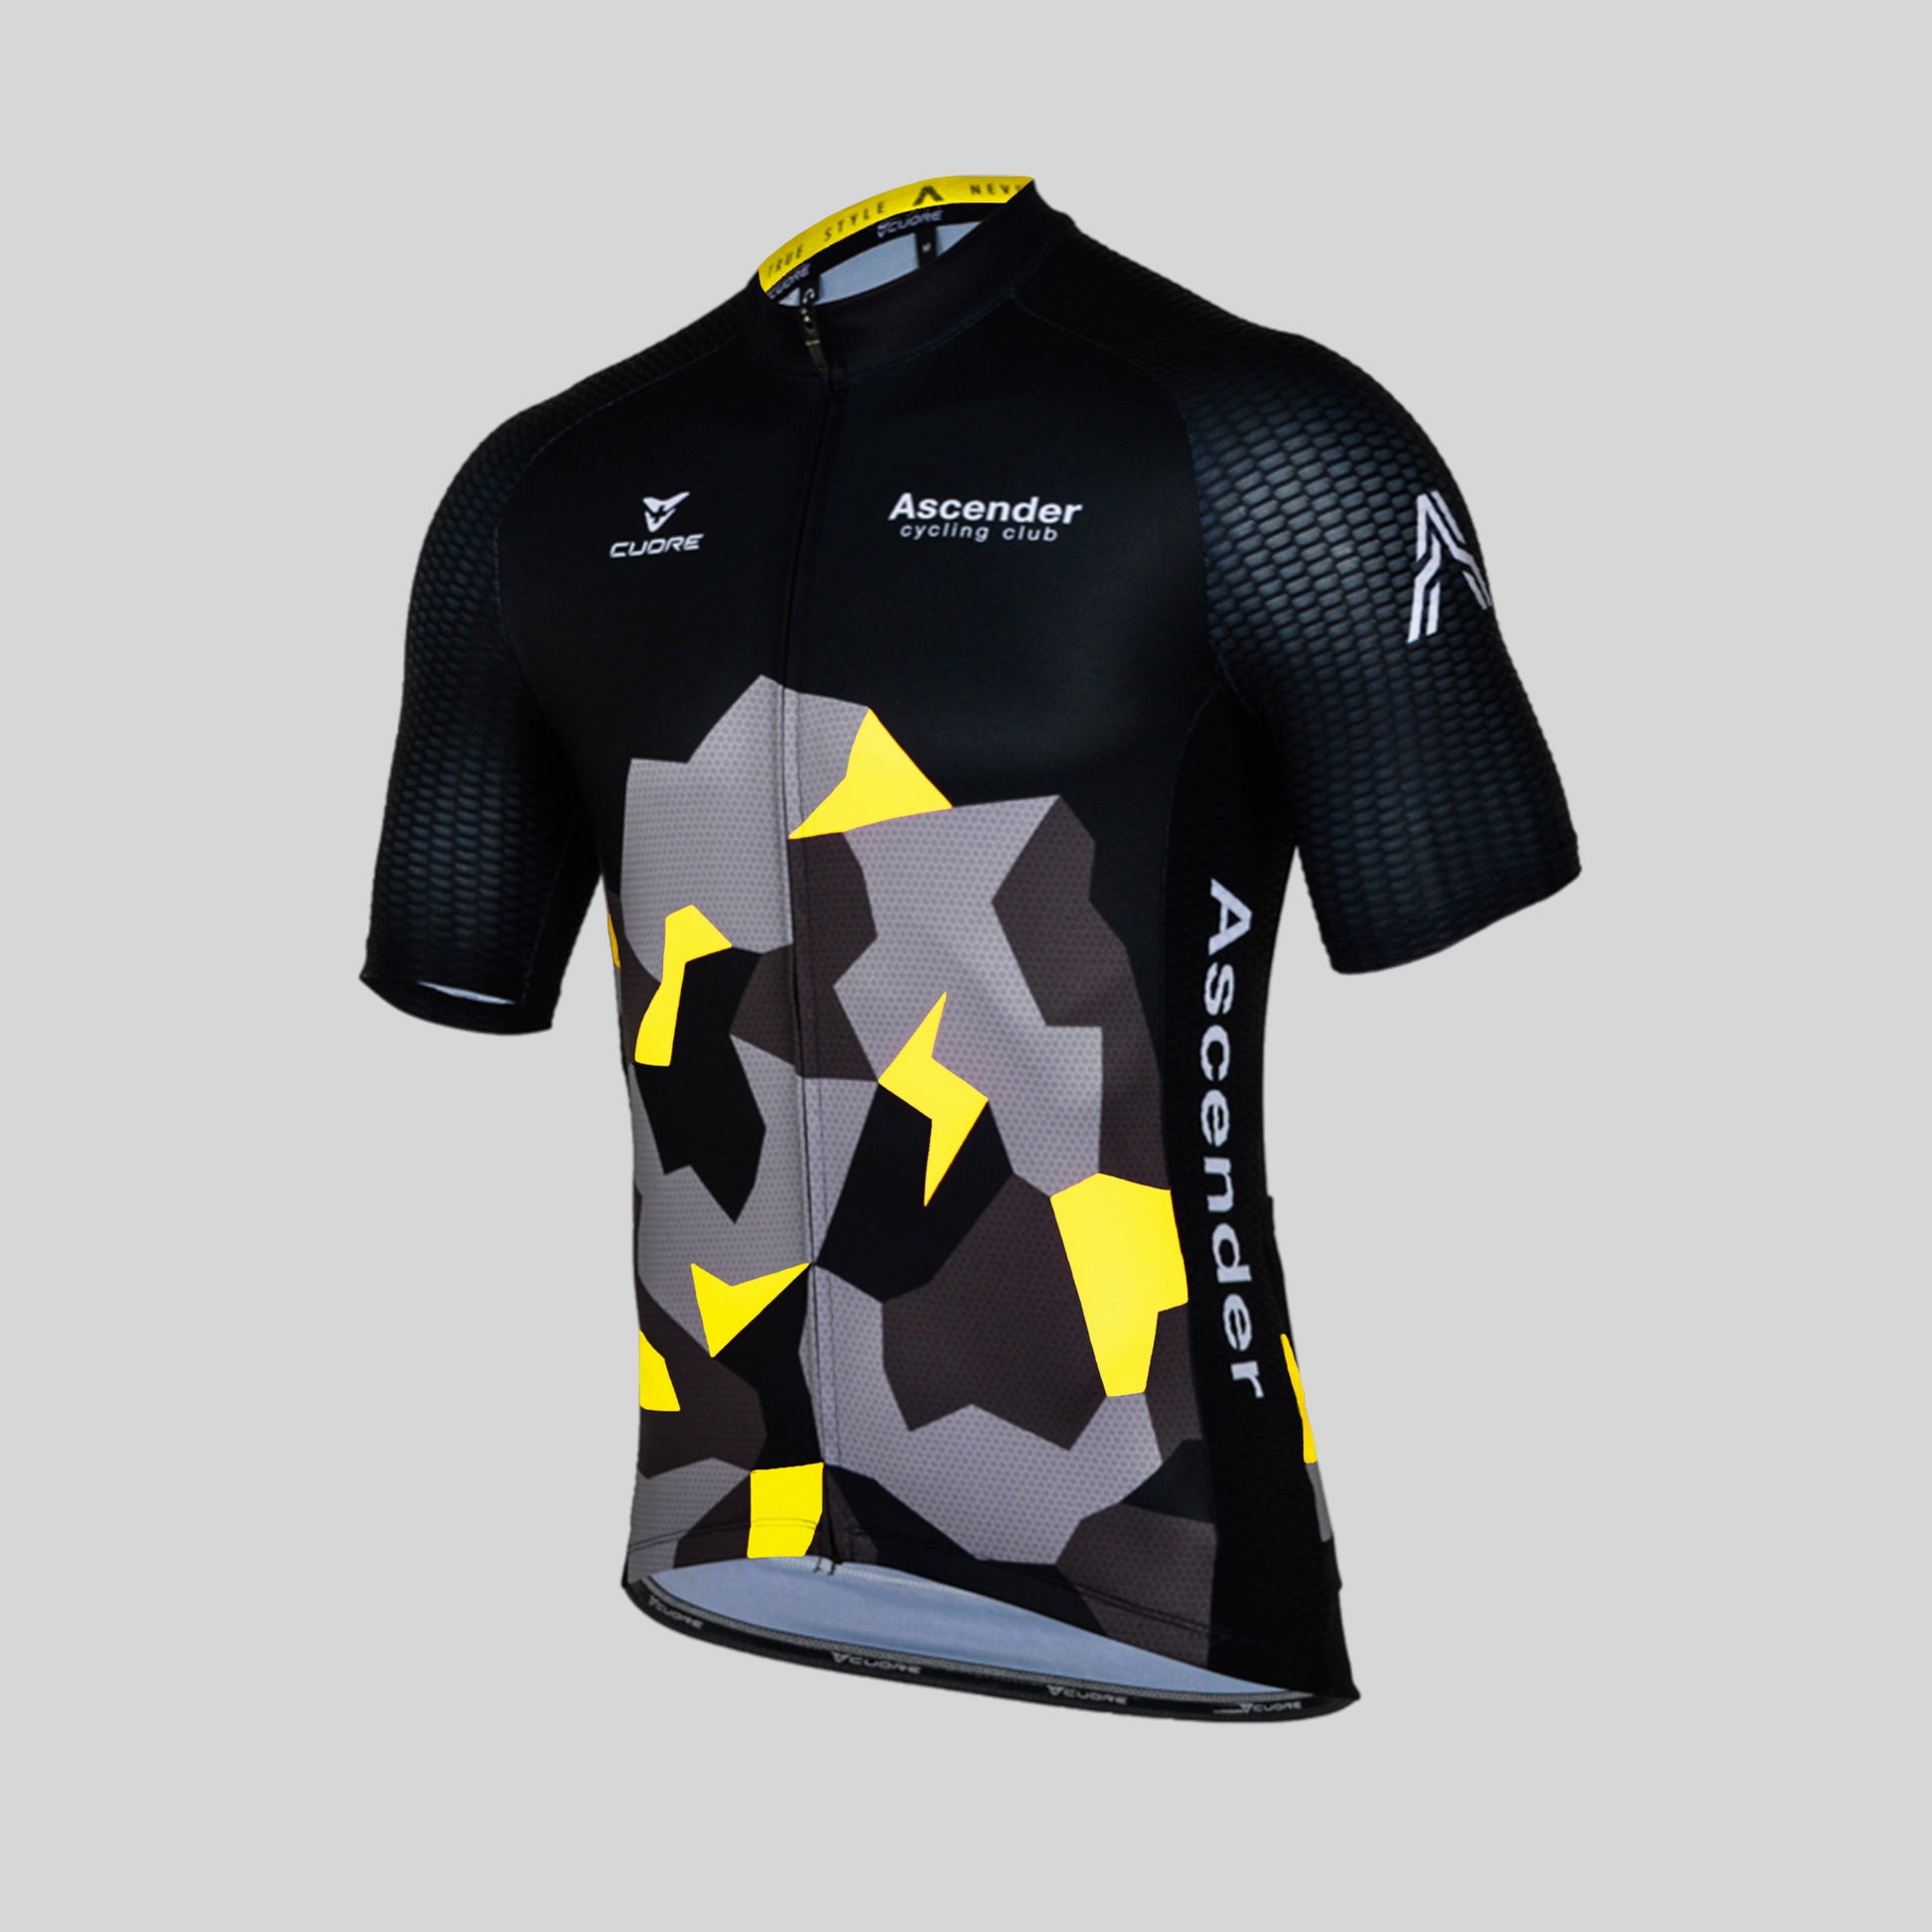 Lightning Bolt Camo Neon Yellow Short Sleeves Jersey from Ascender Cycling Club 3D Front View